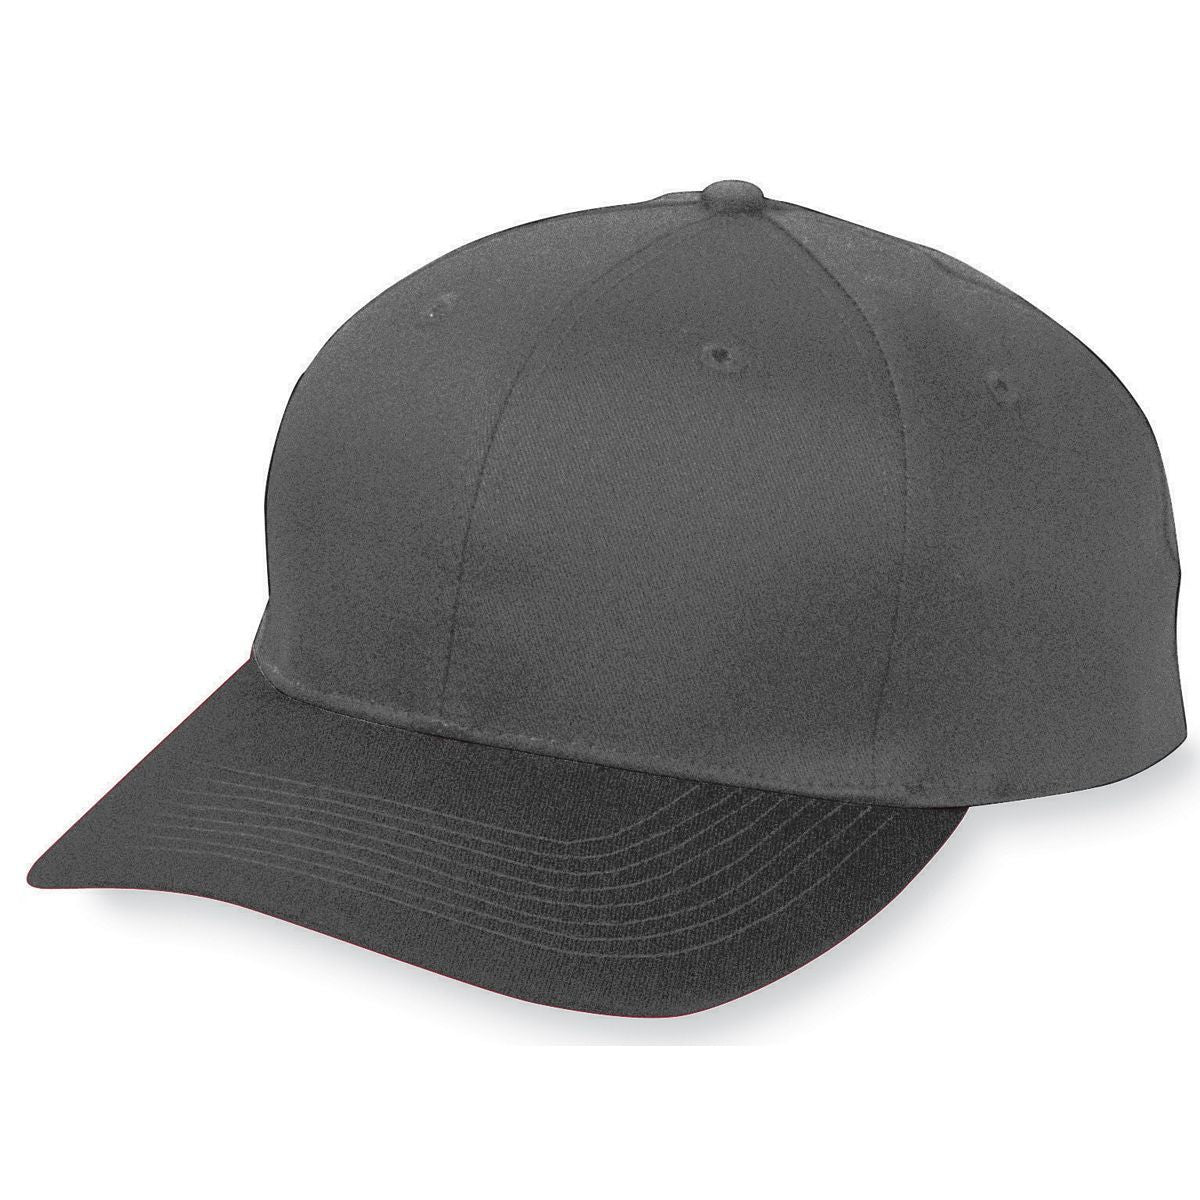 Youth Six-Panel Cotton Twill Low-Profile Cap 6206